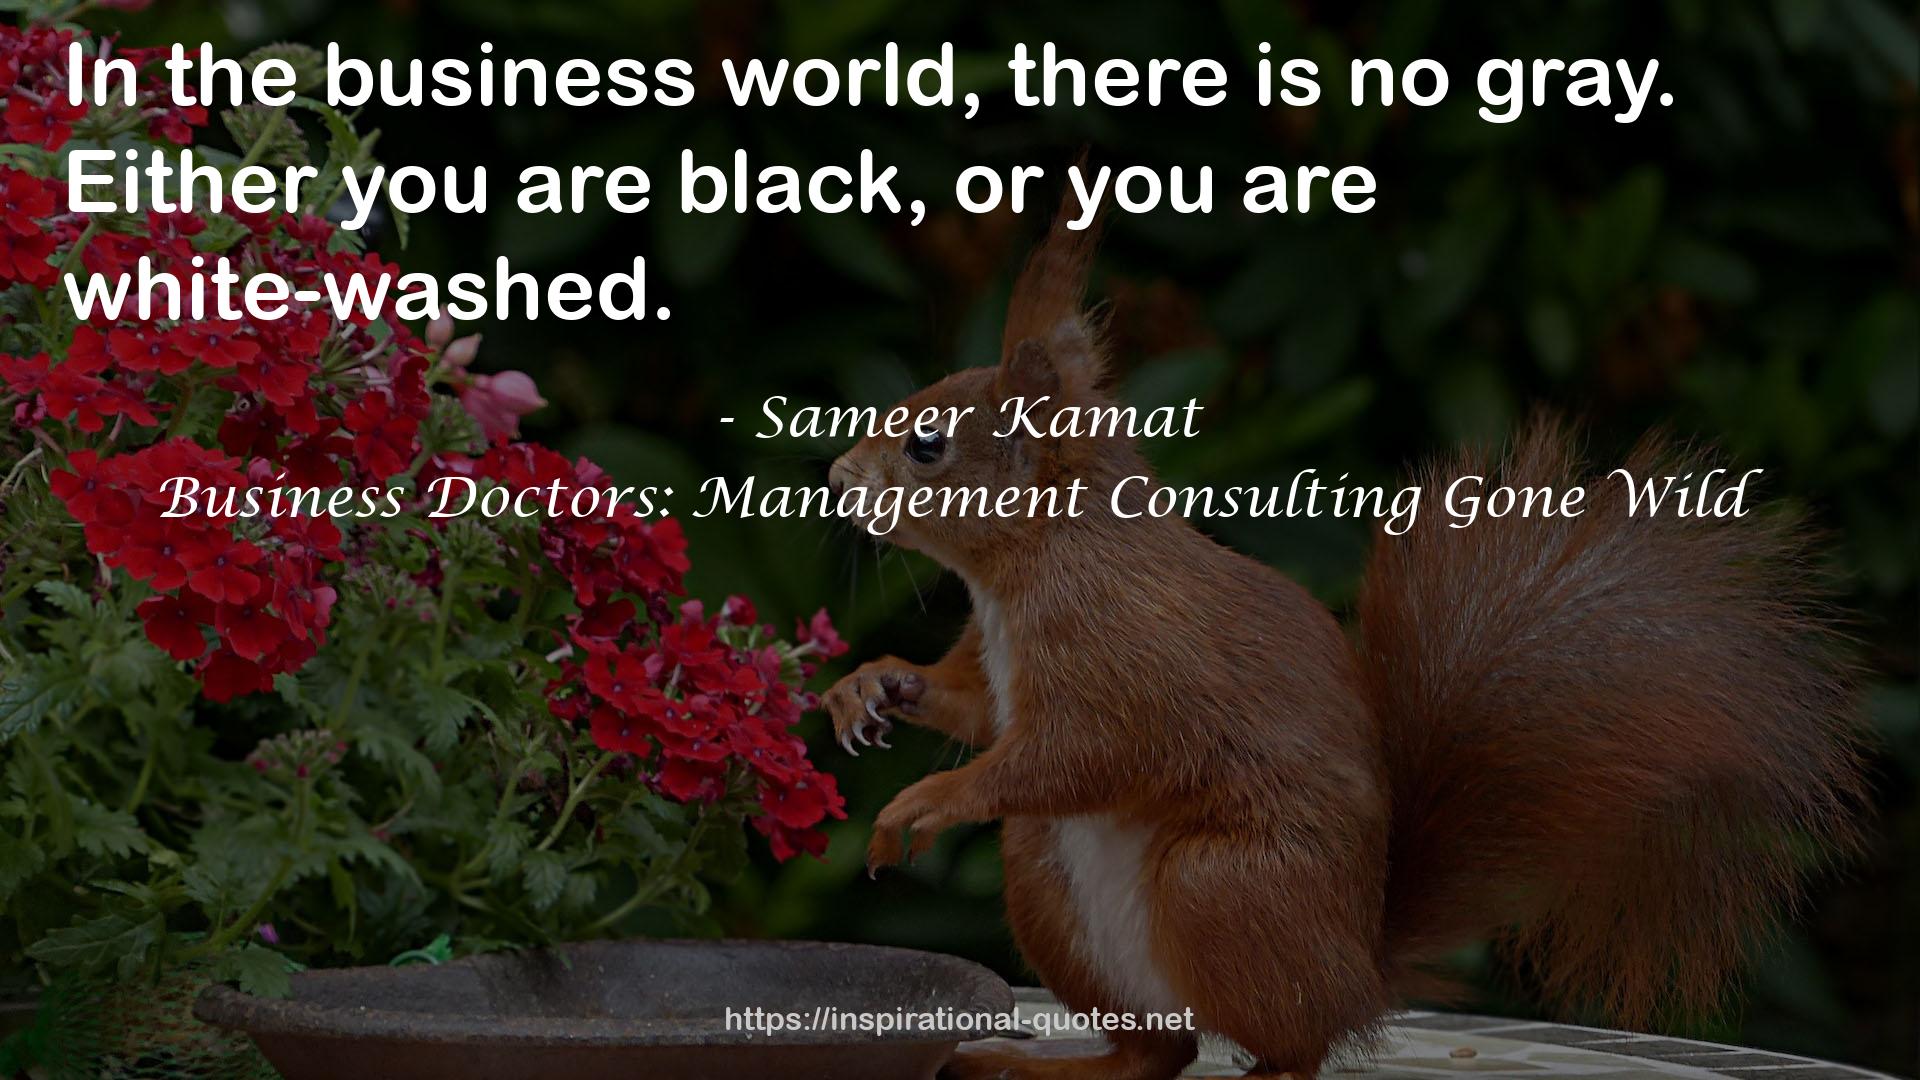 Business Doctors: Management Consulting Gone Wild QUOTES